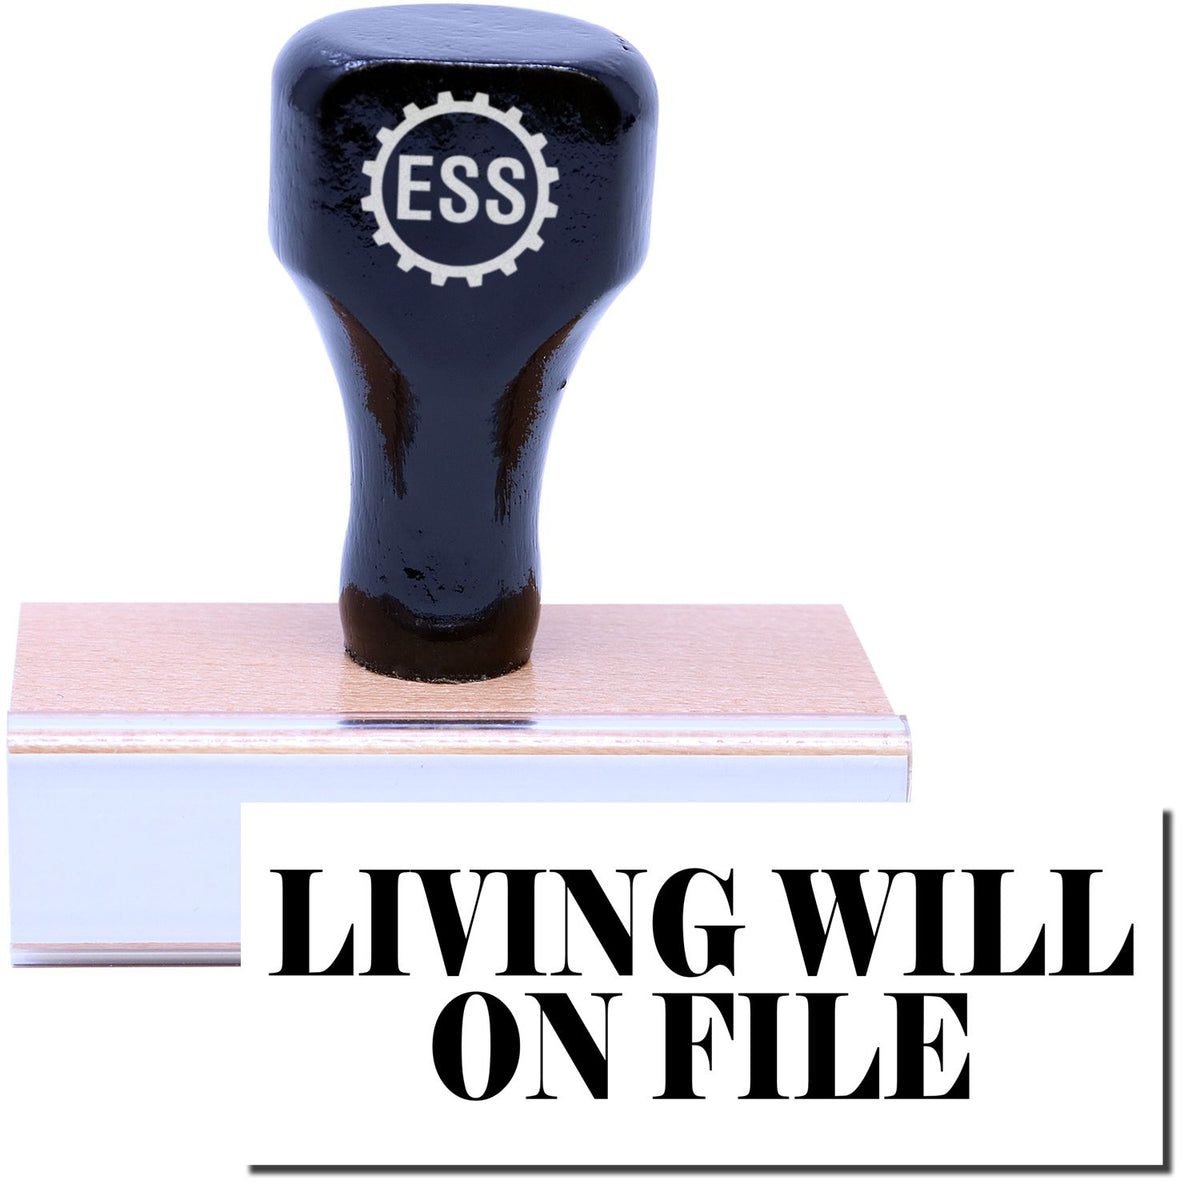 A stock office rubber stamp with a stamped image showing how the text &quot;LIVING WILL ON FILE&quot; is displayed after stamping.